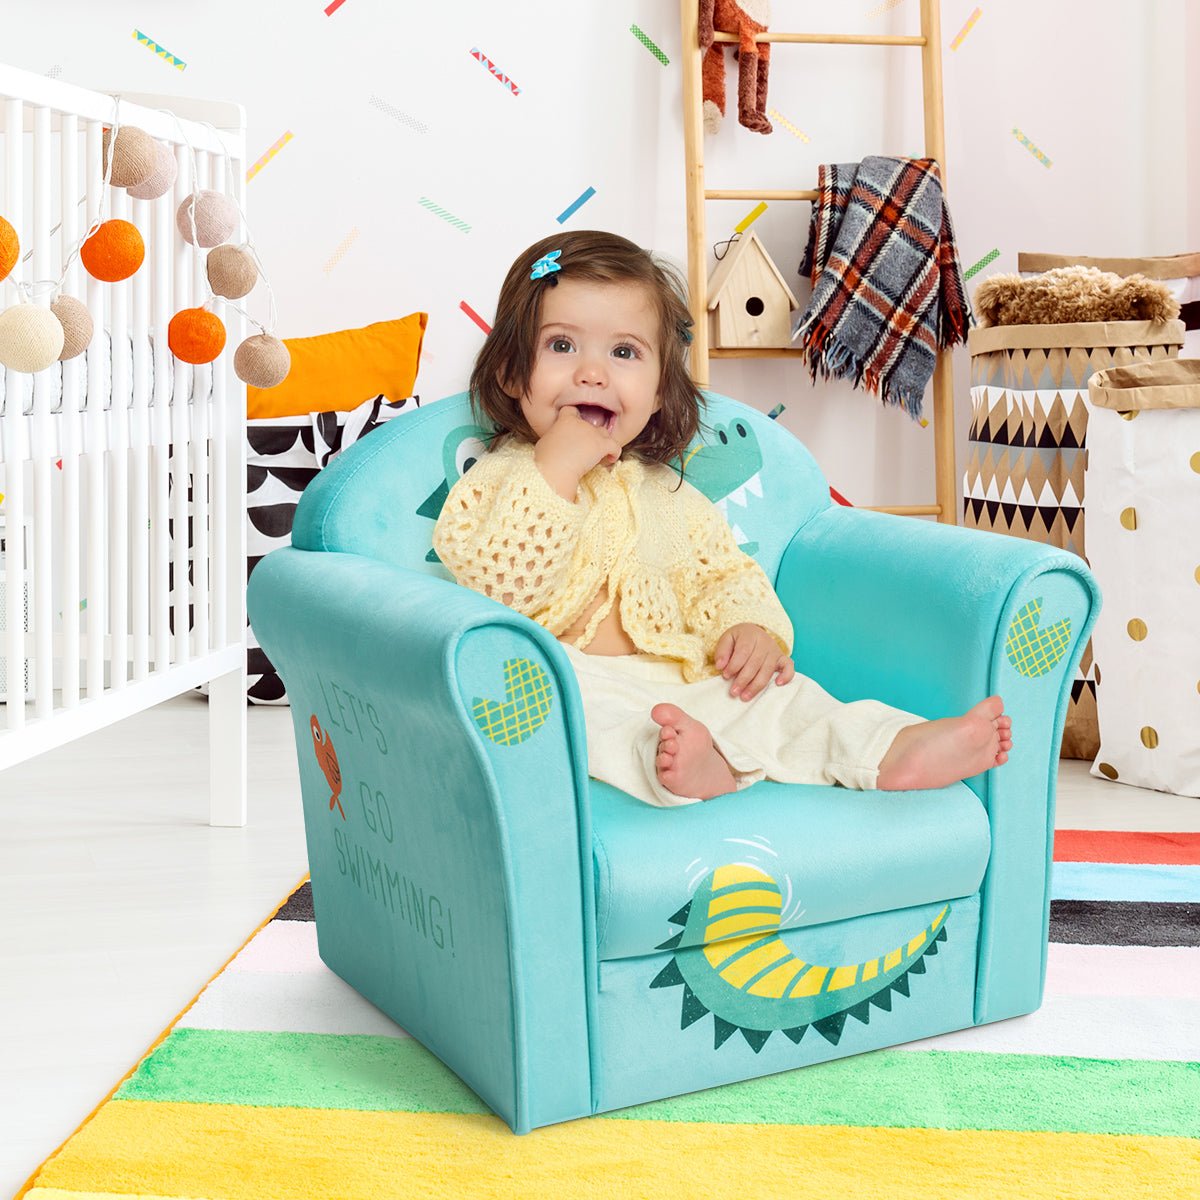 Crocodile Pattern Armchair: Wooden Frame Coziness for Baby Room Comfort